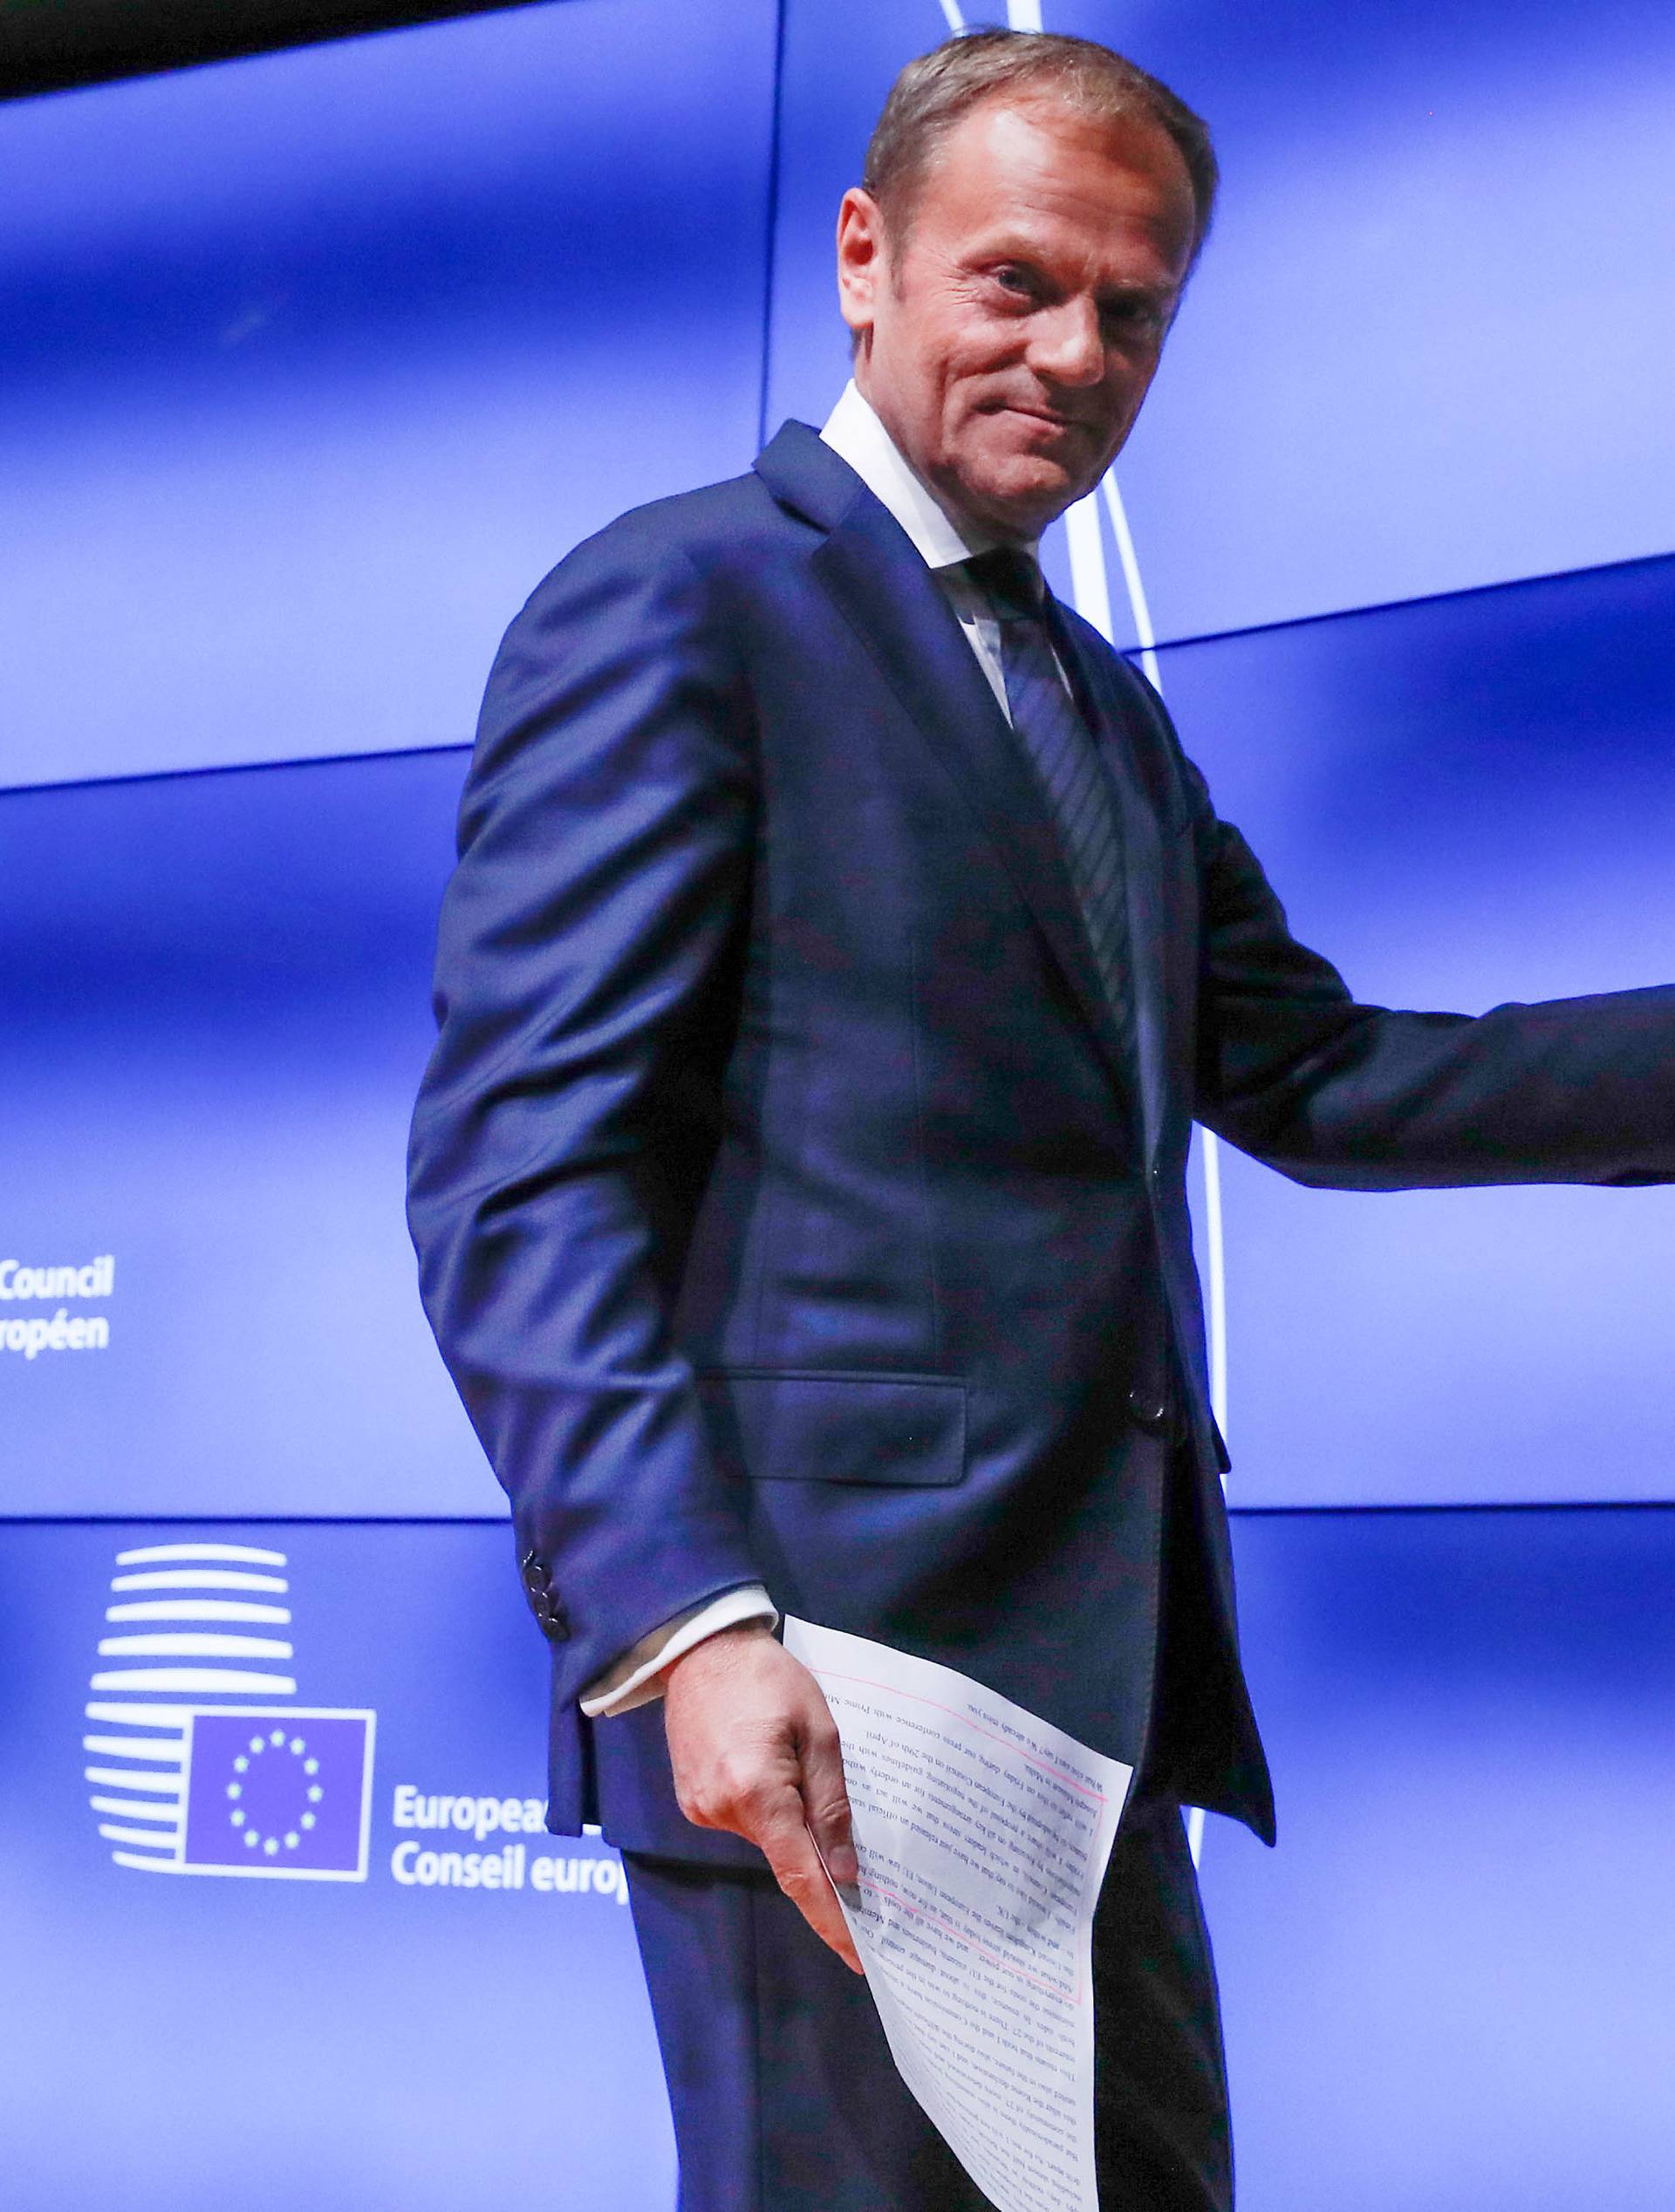 European Council President Donald Tusk shows British Prime Minister Theresa May's Brexit letter in notice of the UK's intention to leave the bloc under Article 50 of the EU's Lisbon Treaty, at the end of a news conference in Brussels